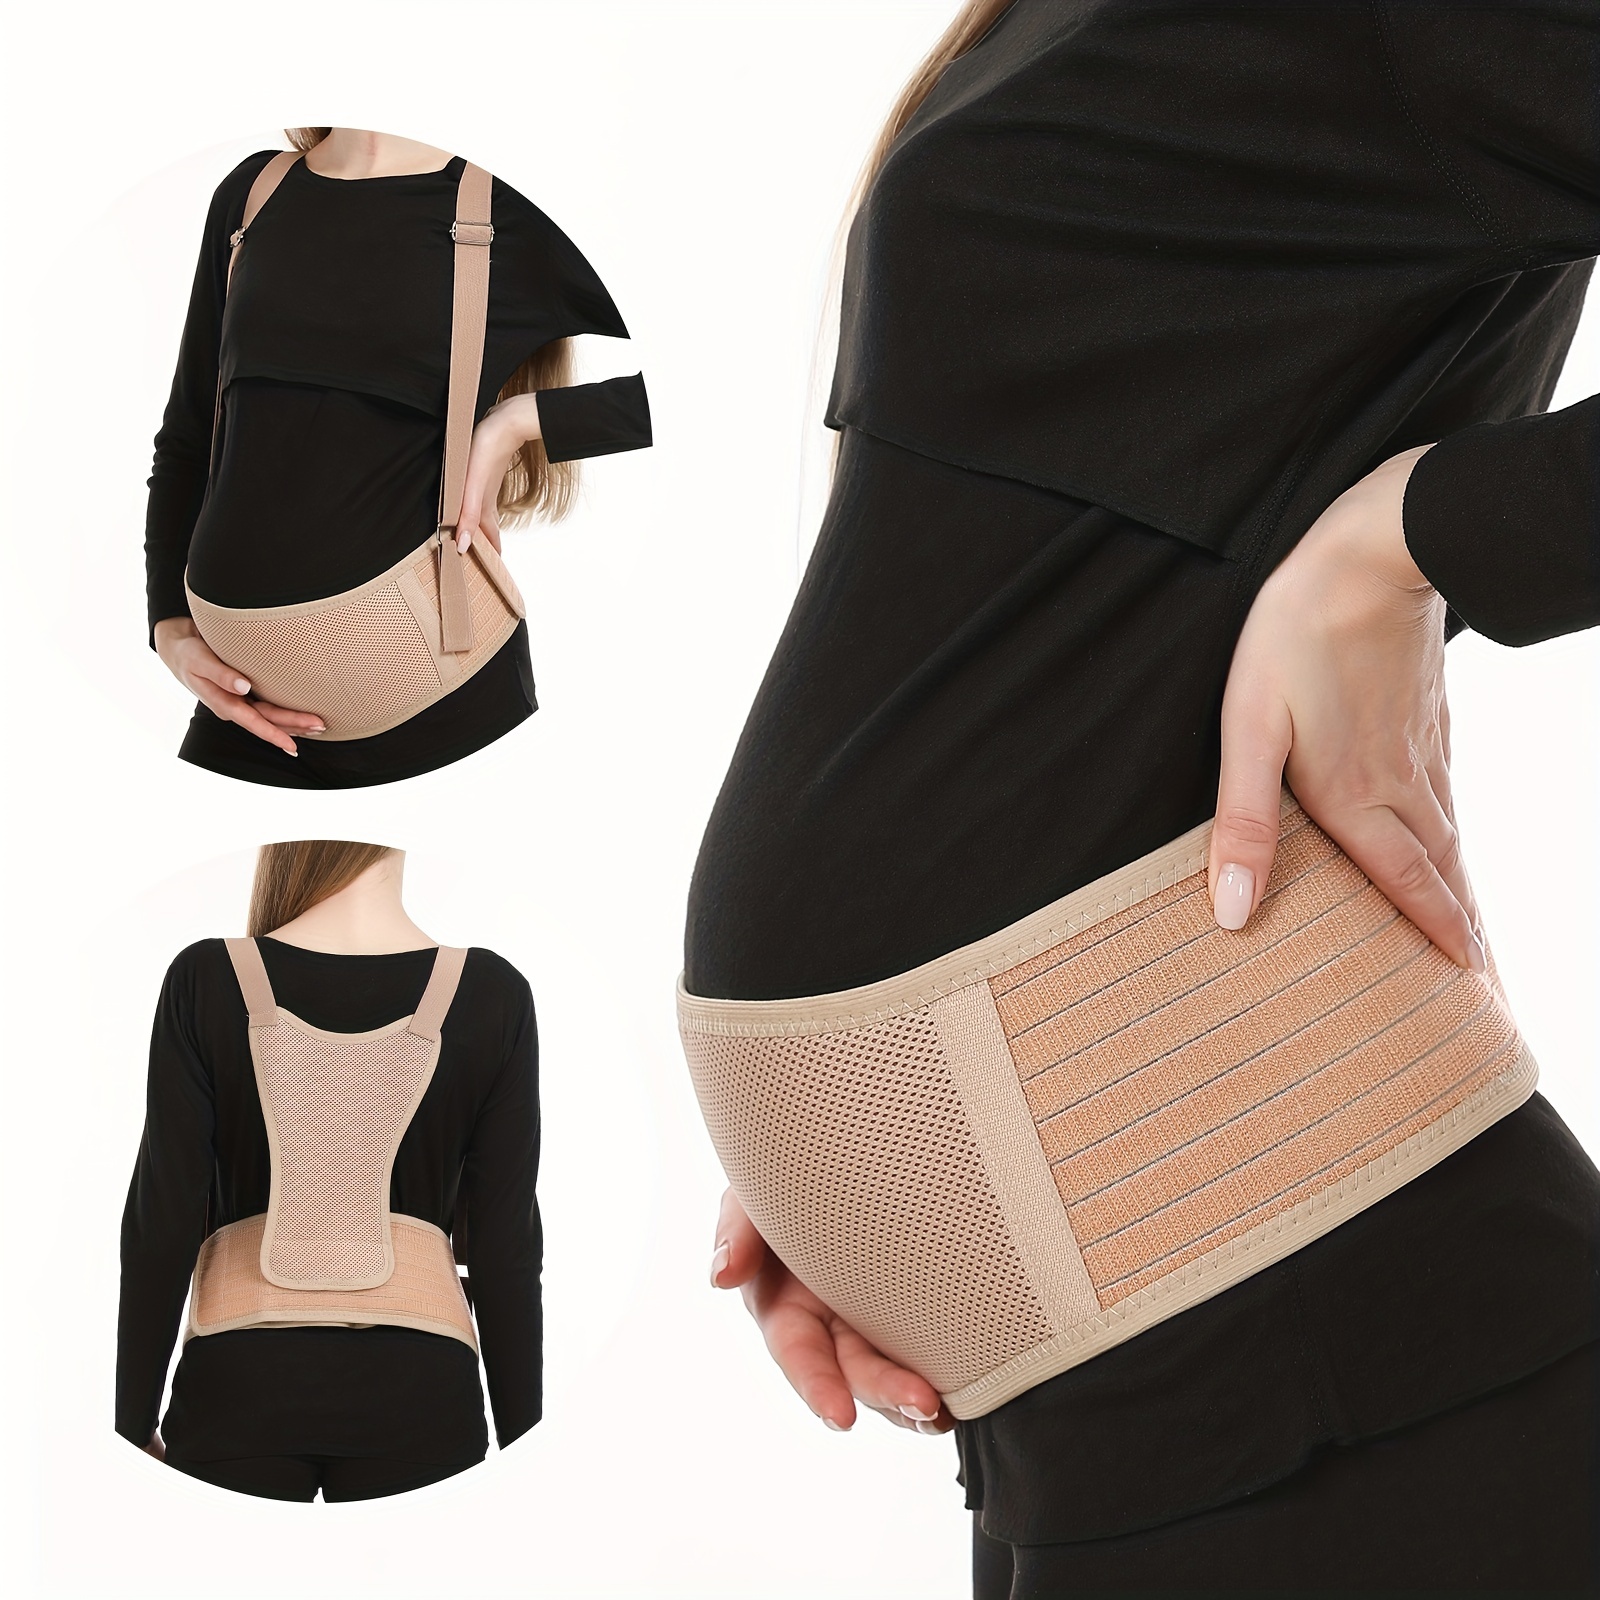 Maternity belt and pelvic support during pregnancy